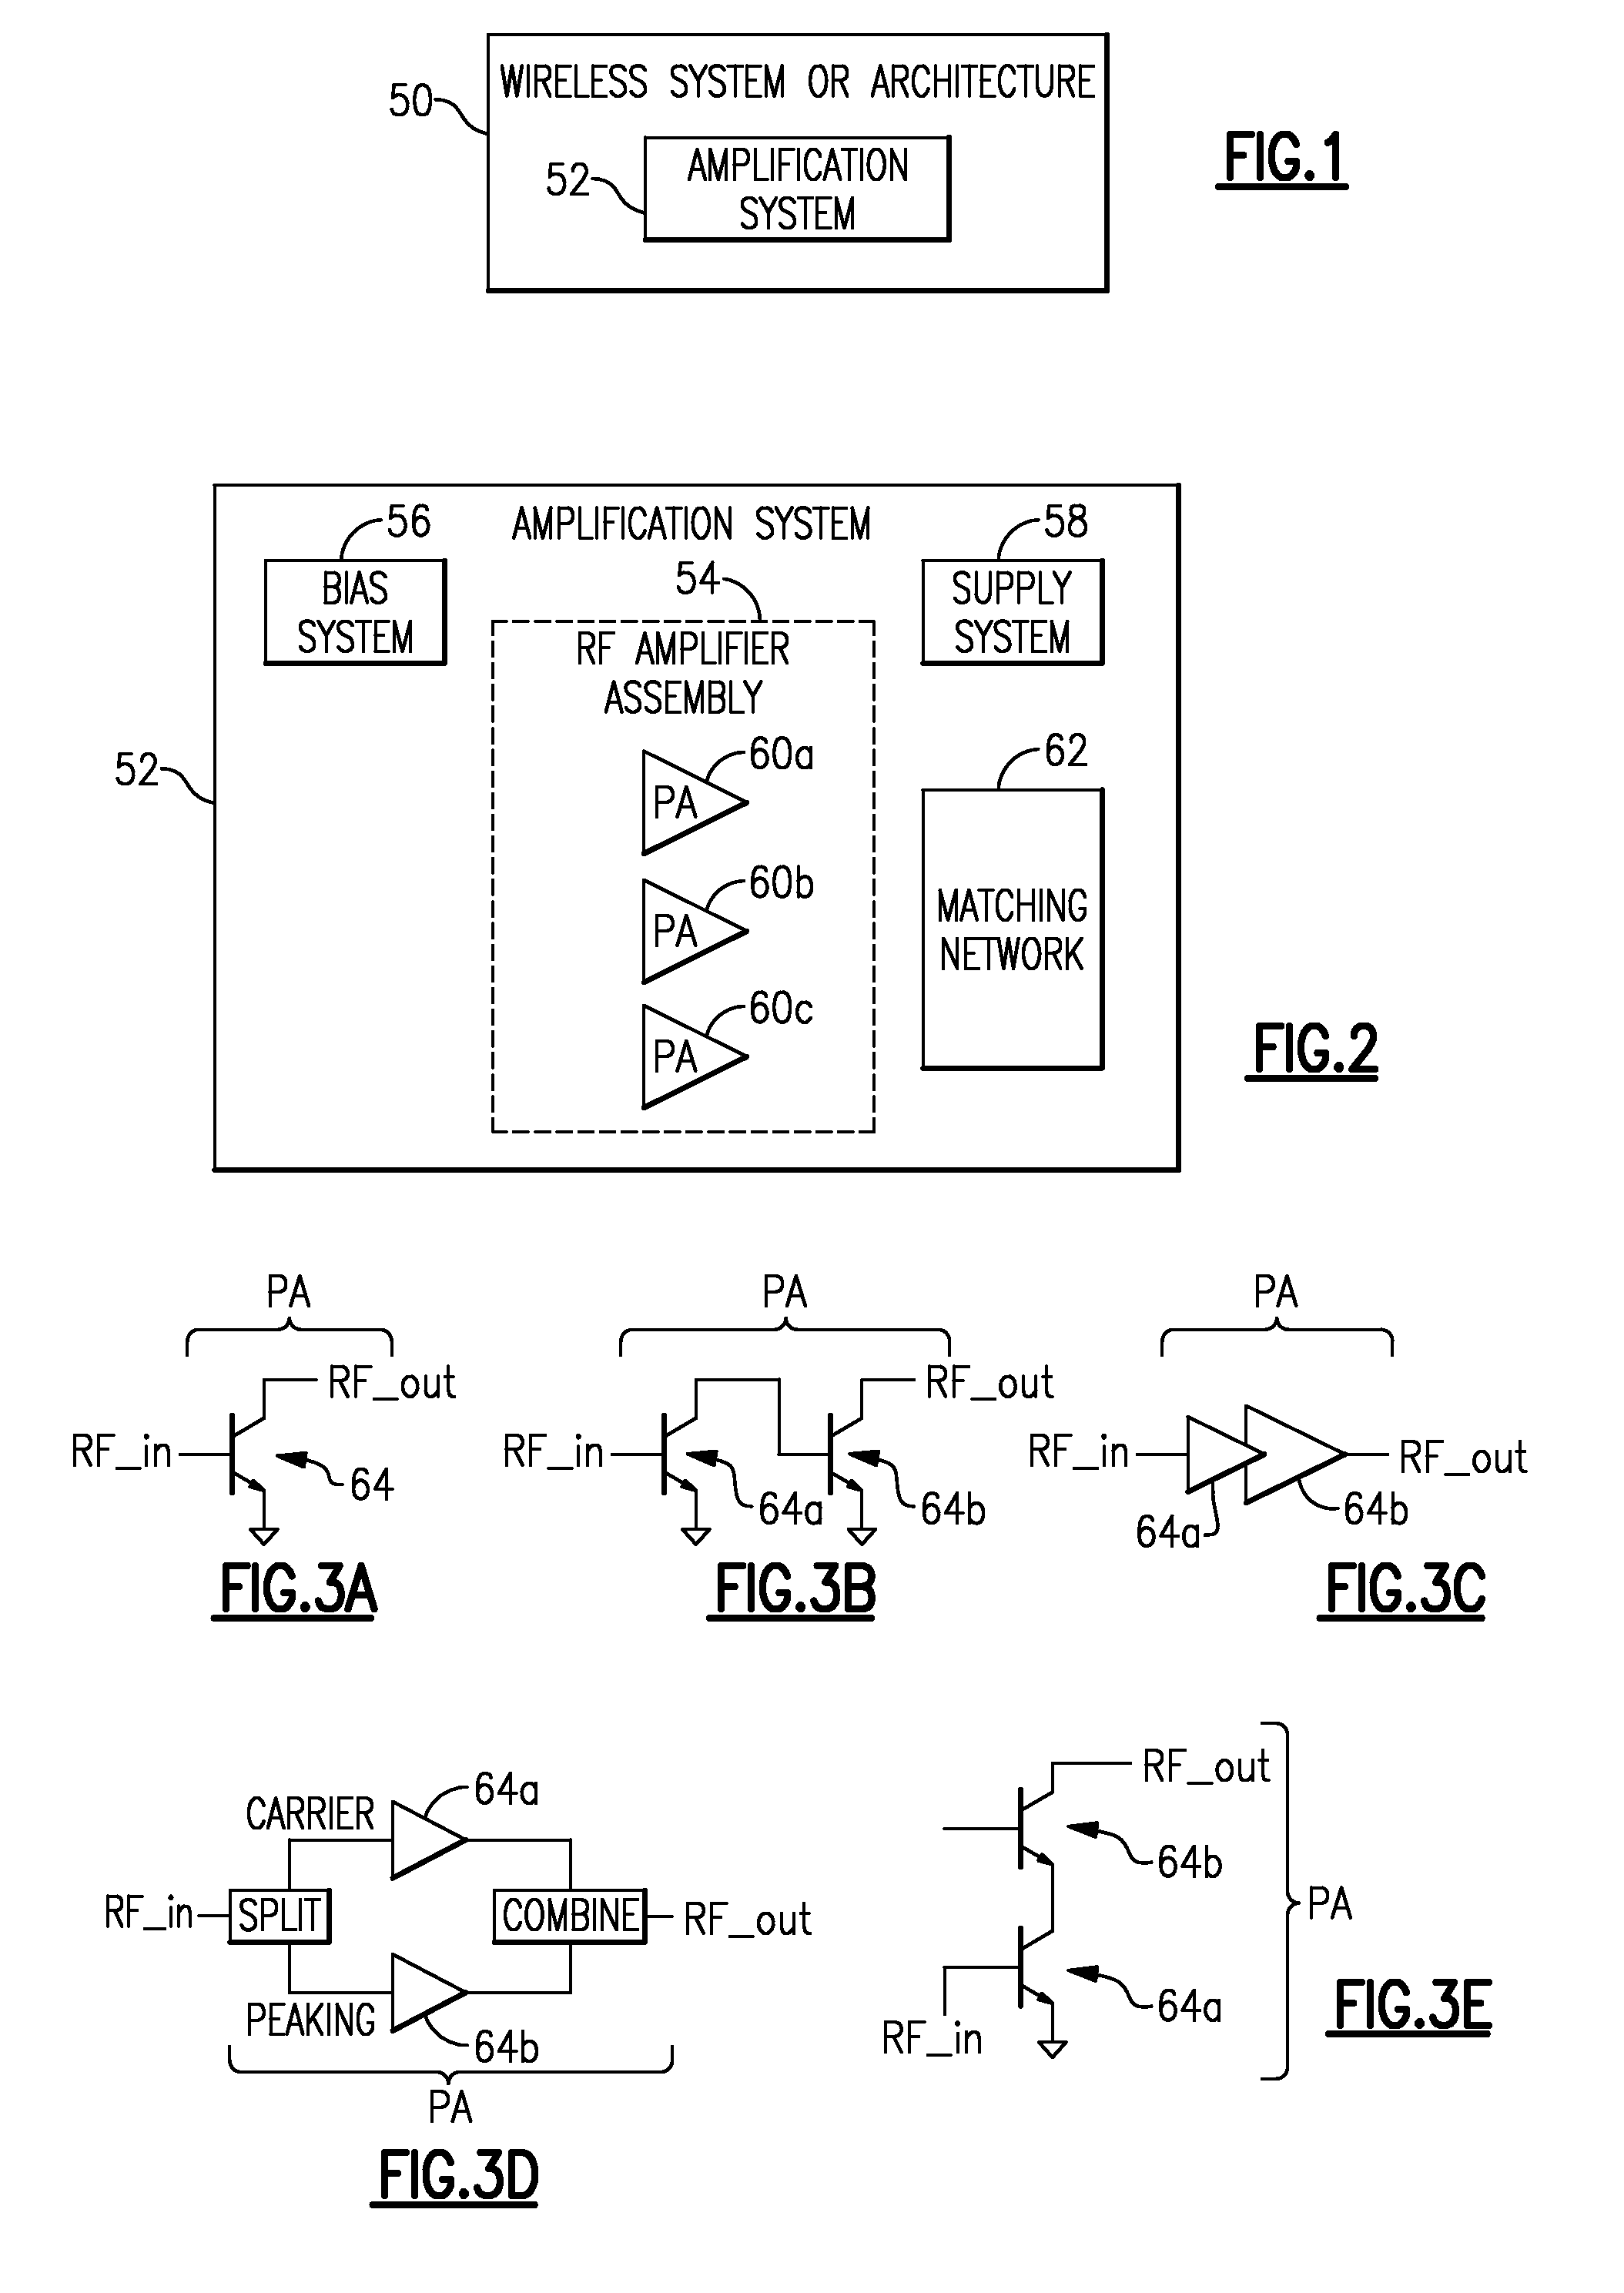 Multi-band power amplification system having enhanced efficiency through elimination of band selection switch